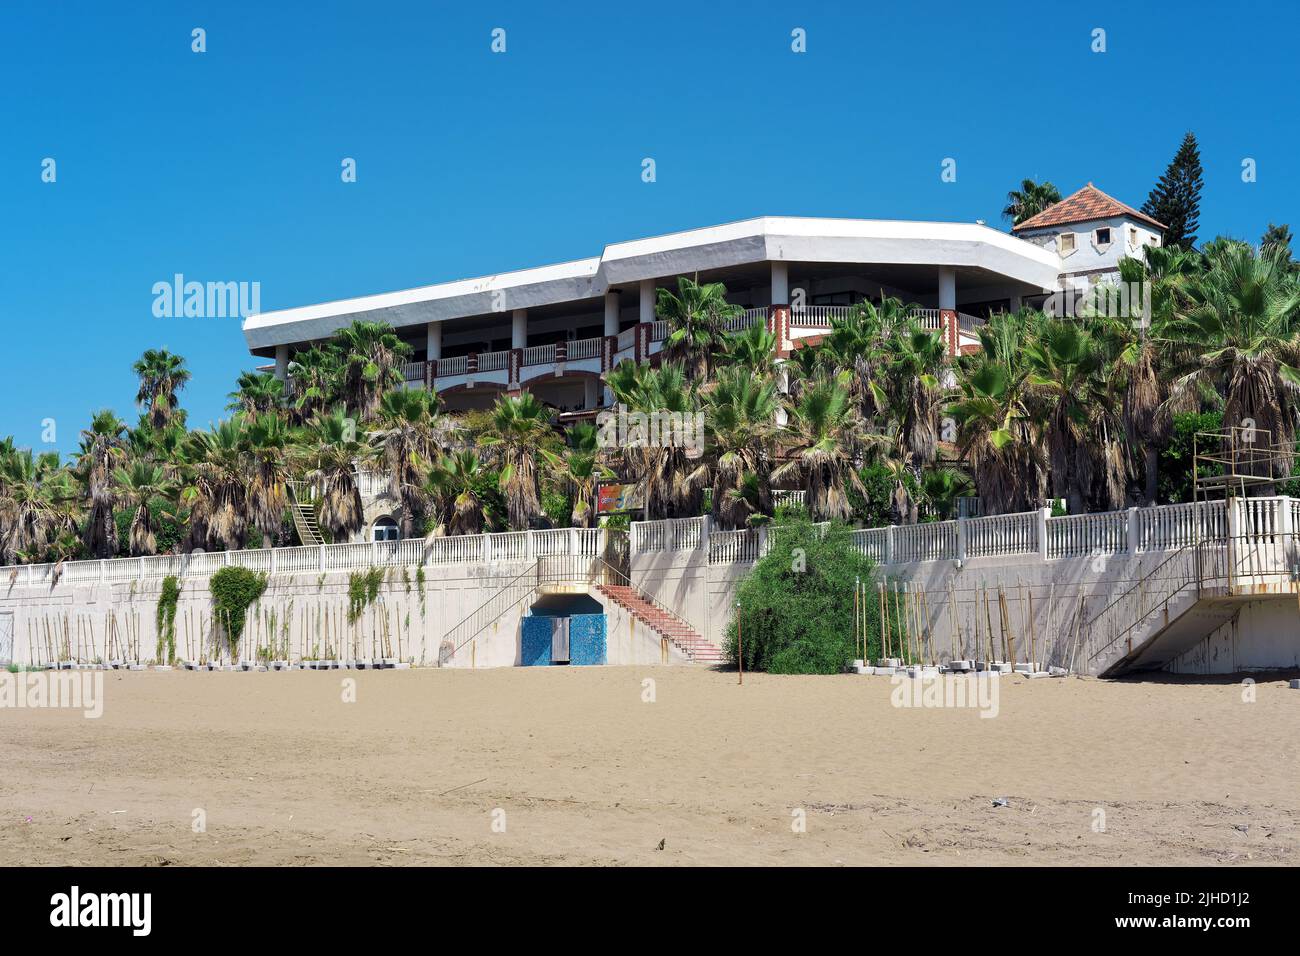 Deserted hotel building by the beach over wall Stock Photo